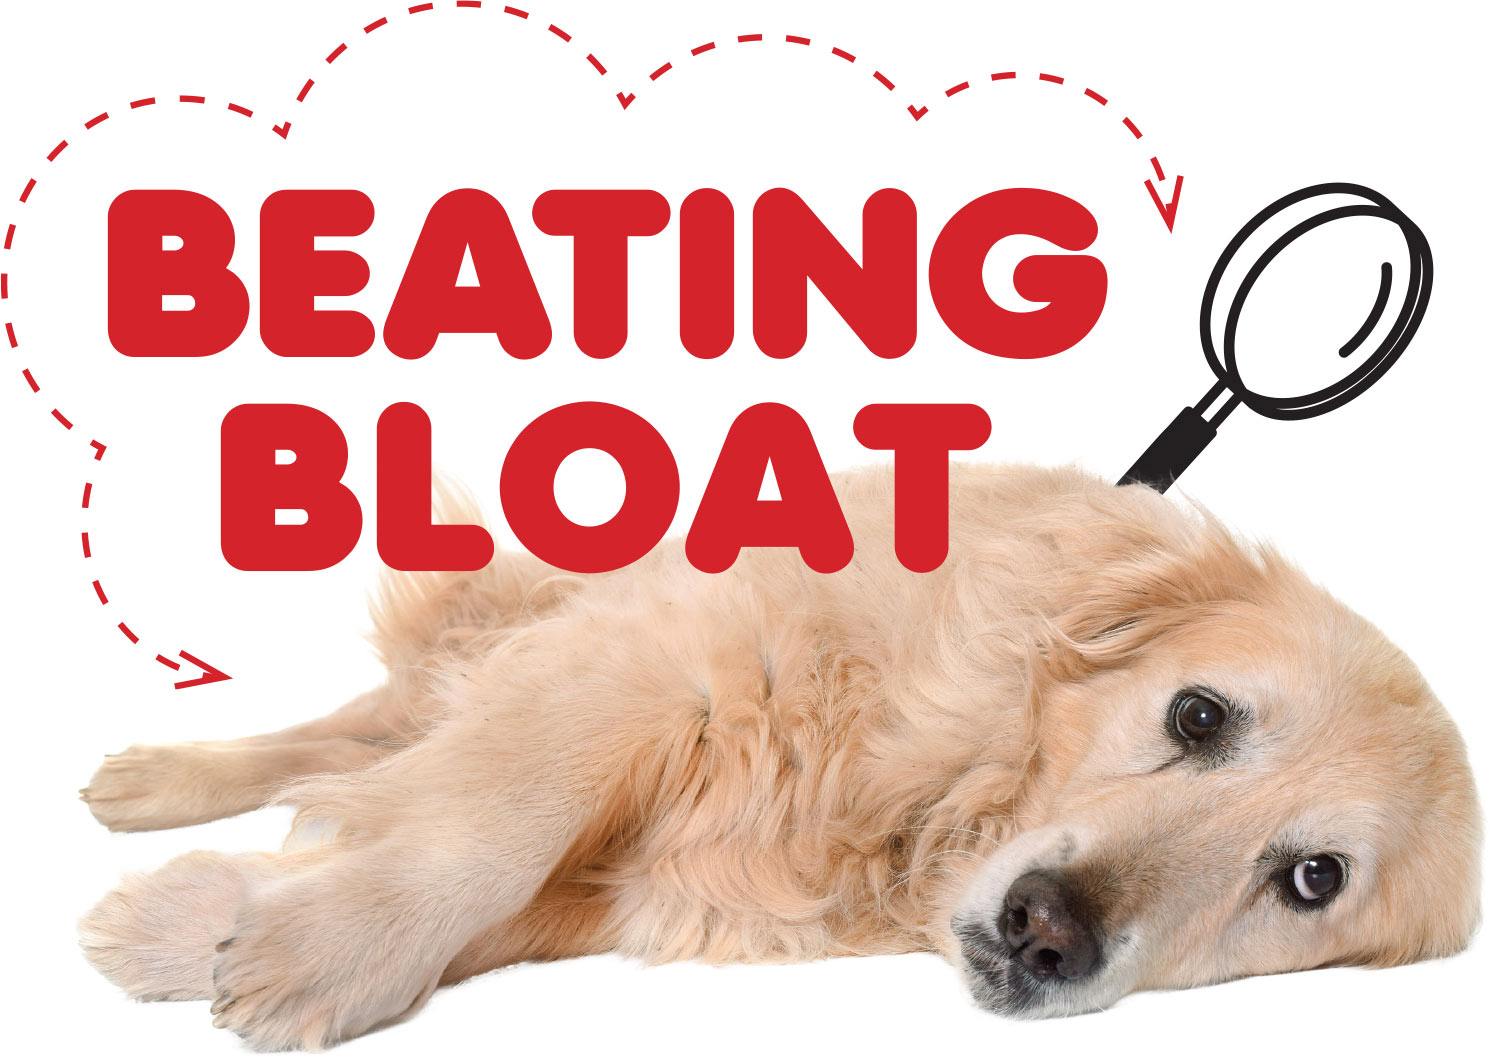 Beating Bloat with golden retriever laying down